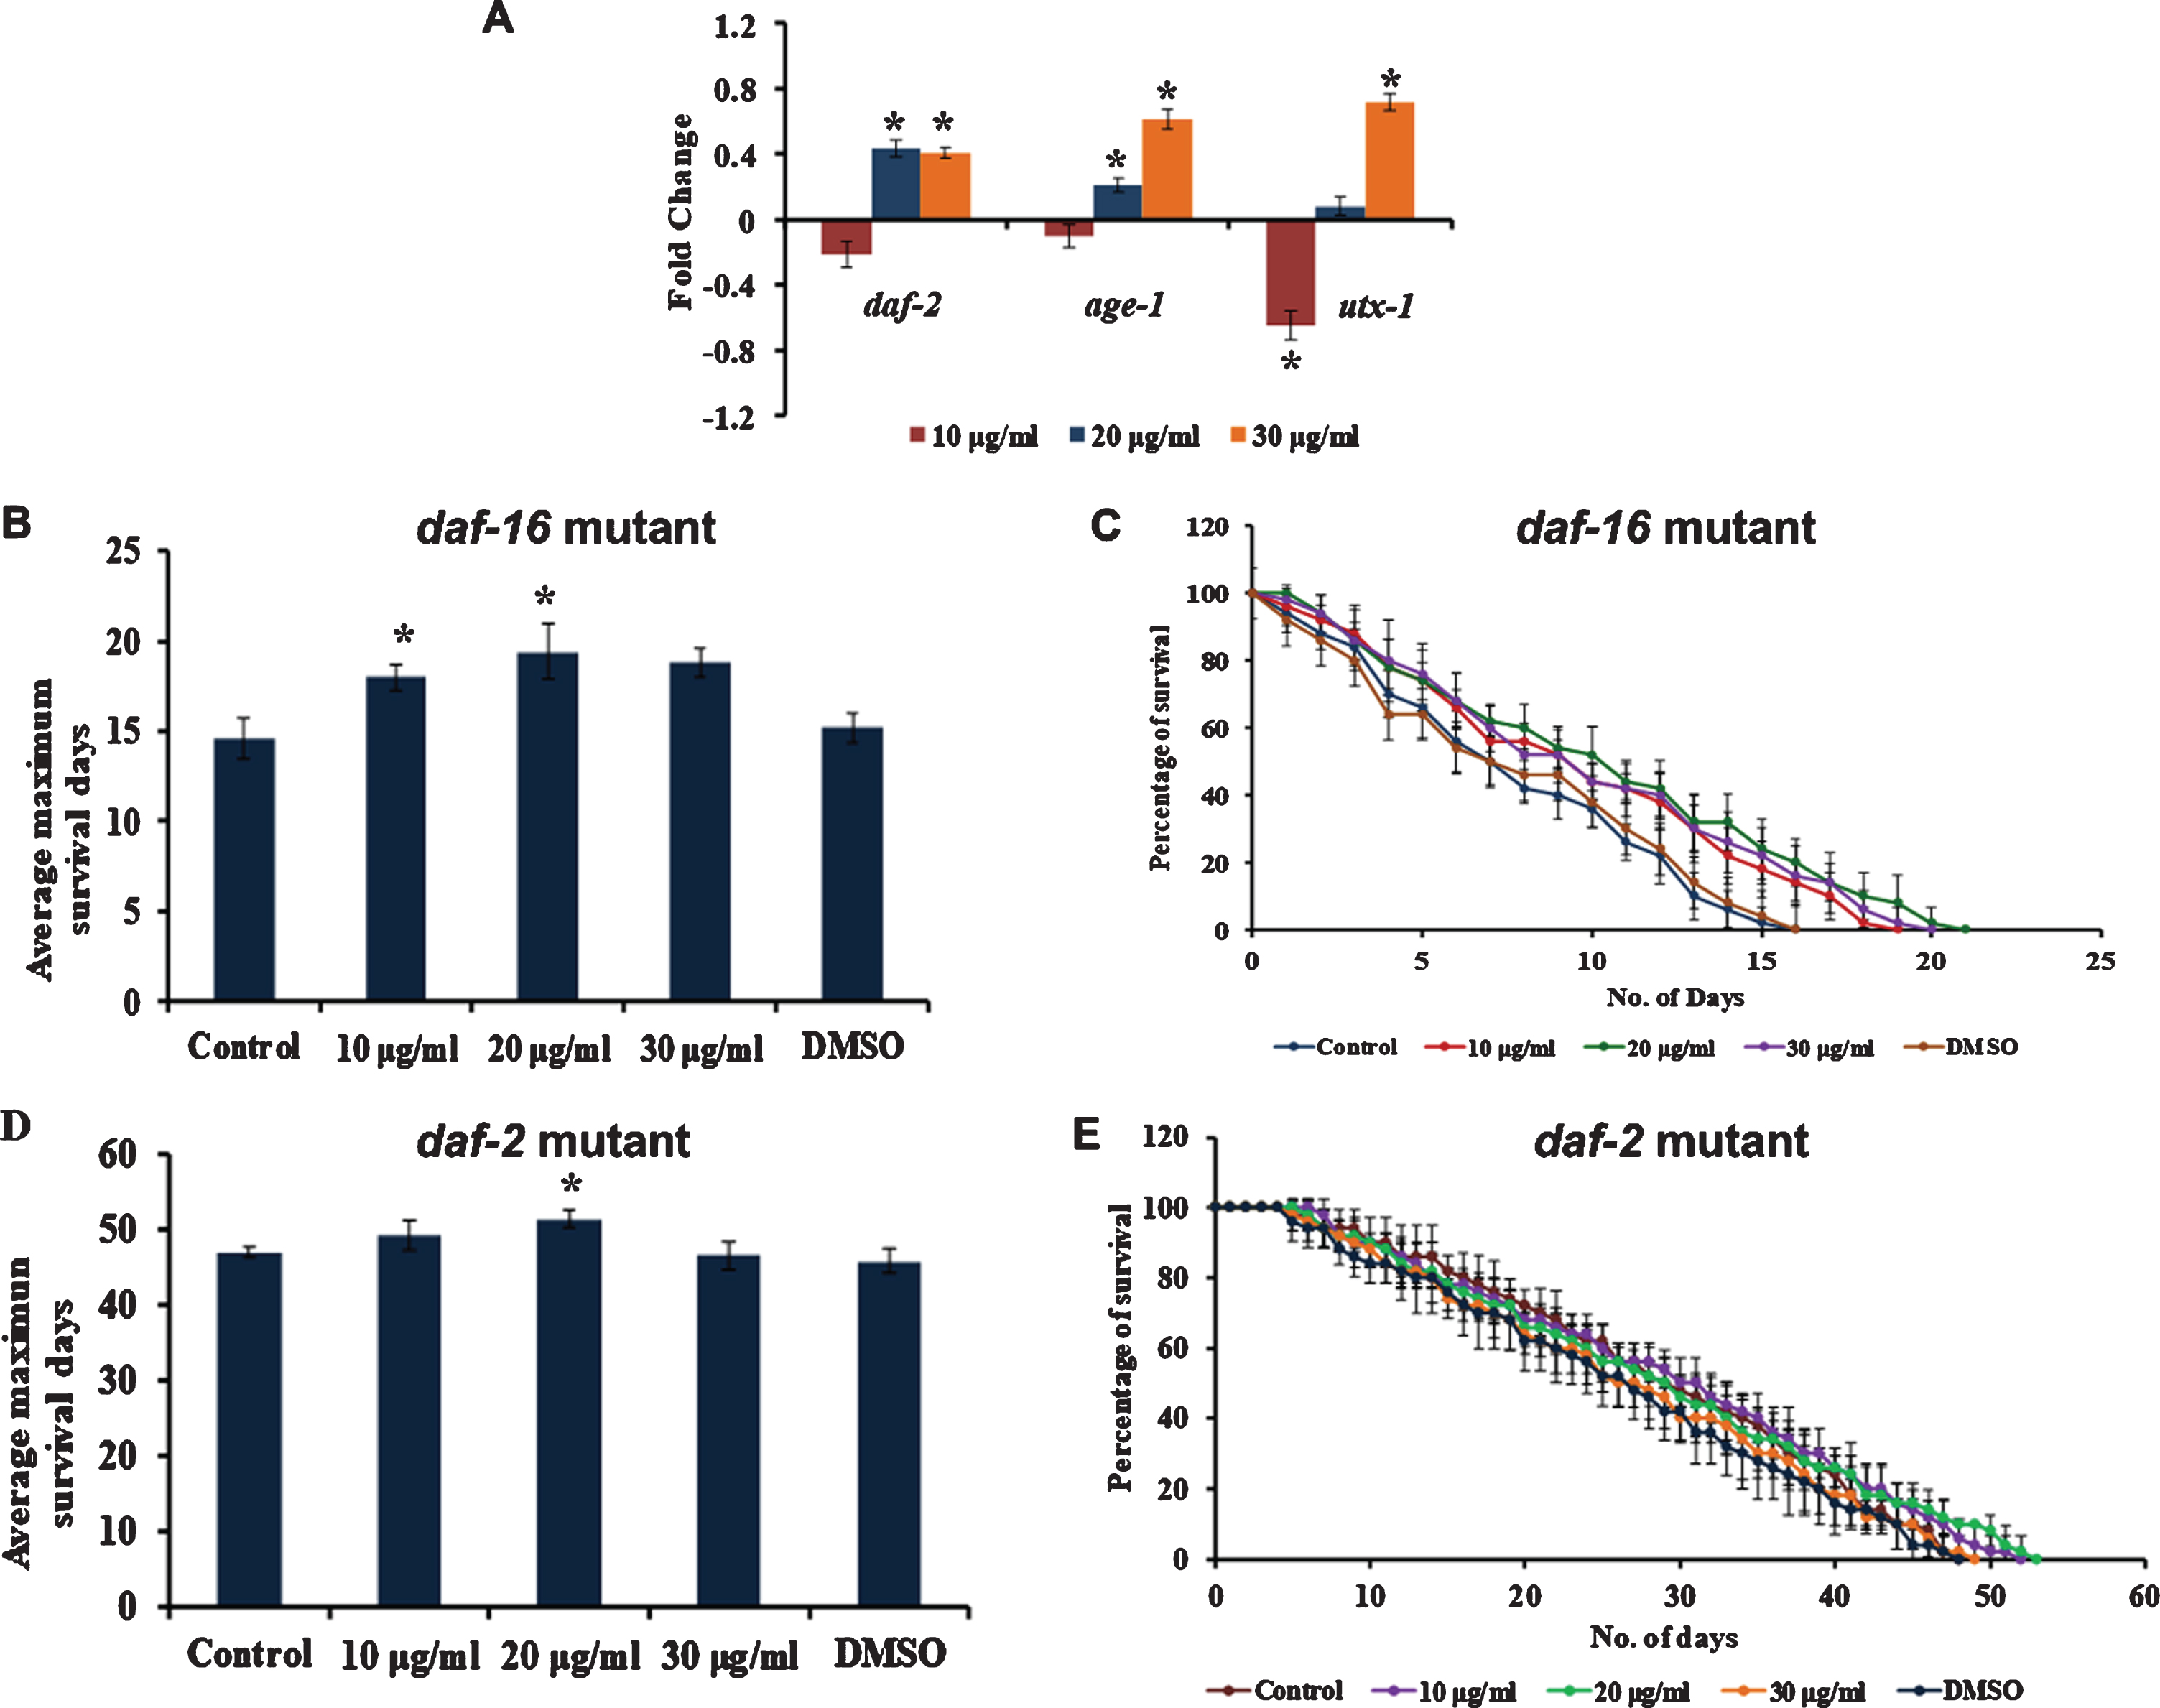 S. asper mediated lifespan extension is independent of DAF-16 pathway (A) Real-Time PCR analysis of daf-2, age-1 and utx-1 was done in nematodes treated with 10–30μg/ml of S. asper extract. All the genes were upregulated in a dose-dependent manner when compared to untreated control which was normalized to the X-axis (B) Maximum lifespan of daf-16 mutants (mu86) were significantly (p < 0.05) extended when treated with 10–30μg/ml of S. asper extract at 15 °C (C) Graph representing the average of maximum lifespan extension of daf-16 mutants when treated with 10–30μg/ml of S. asper extract (D) Maximum lifespan of daf-2 mutants (e1370) were significantly (p < 0.05) extended when treated with 10–30μg/ml of S. asper extract at 15 °C (E) Graph representing the average of maximum lifespan extension of daf-2 mutants when treated with 10–30μg/ml of S. asper extract.